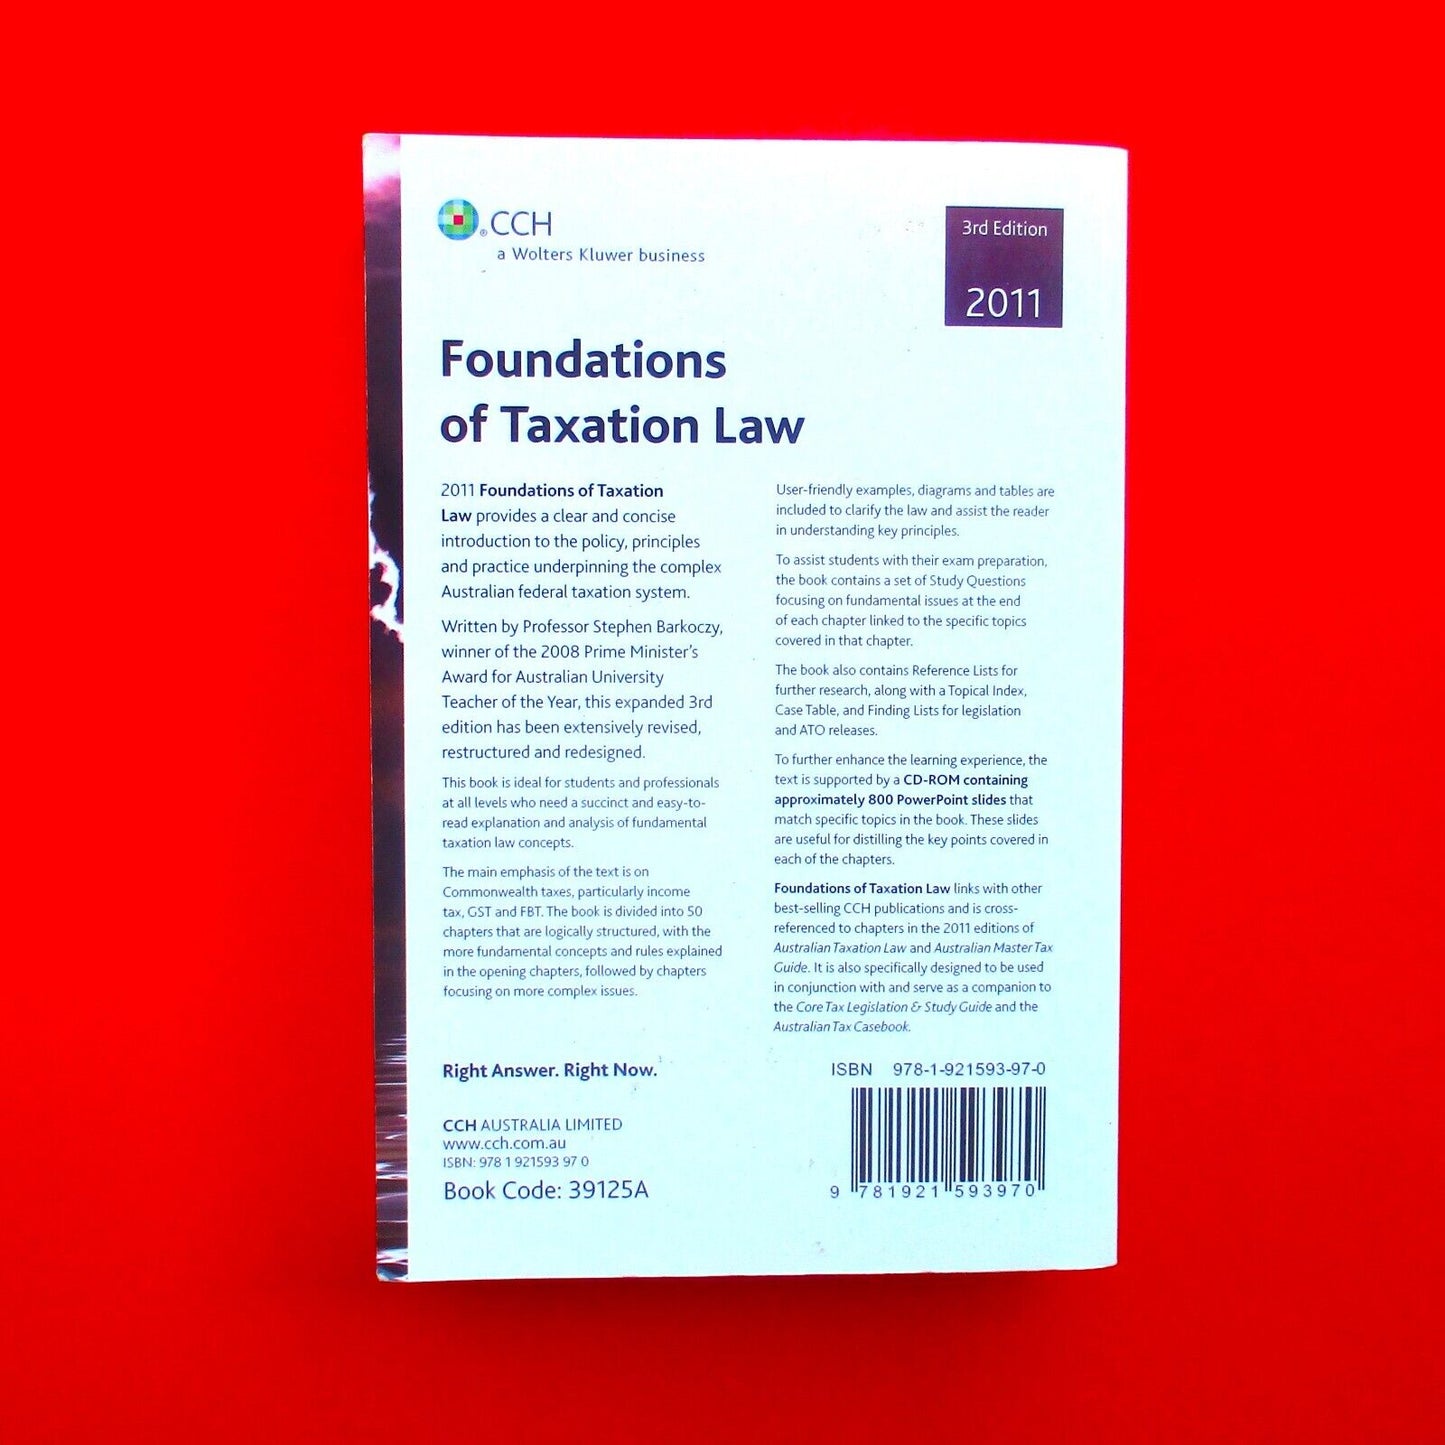 Foundations of Taxation Law 2011 by Stephen Barkoczy Paperback  Text Book